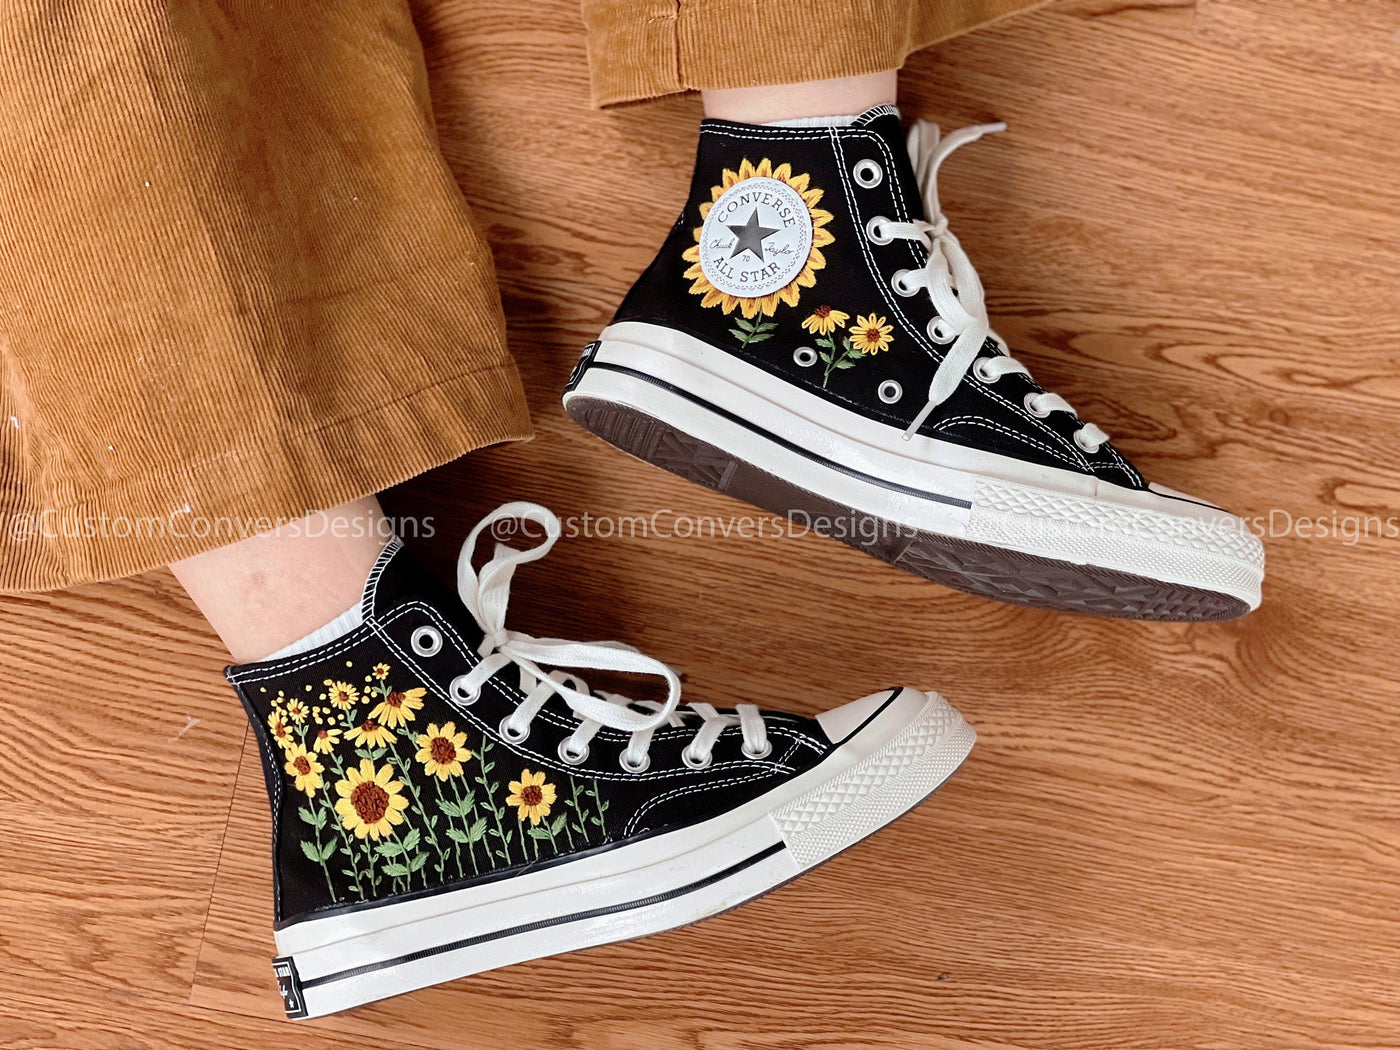 Converse Sunflower Embroidery - ADF6